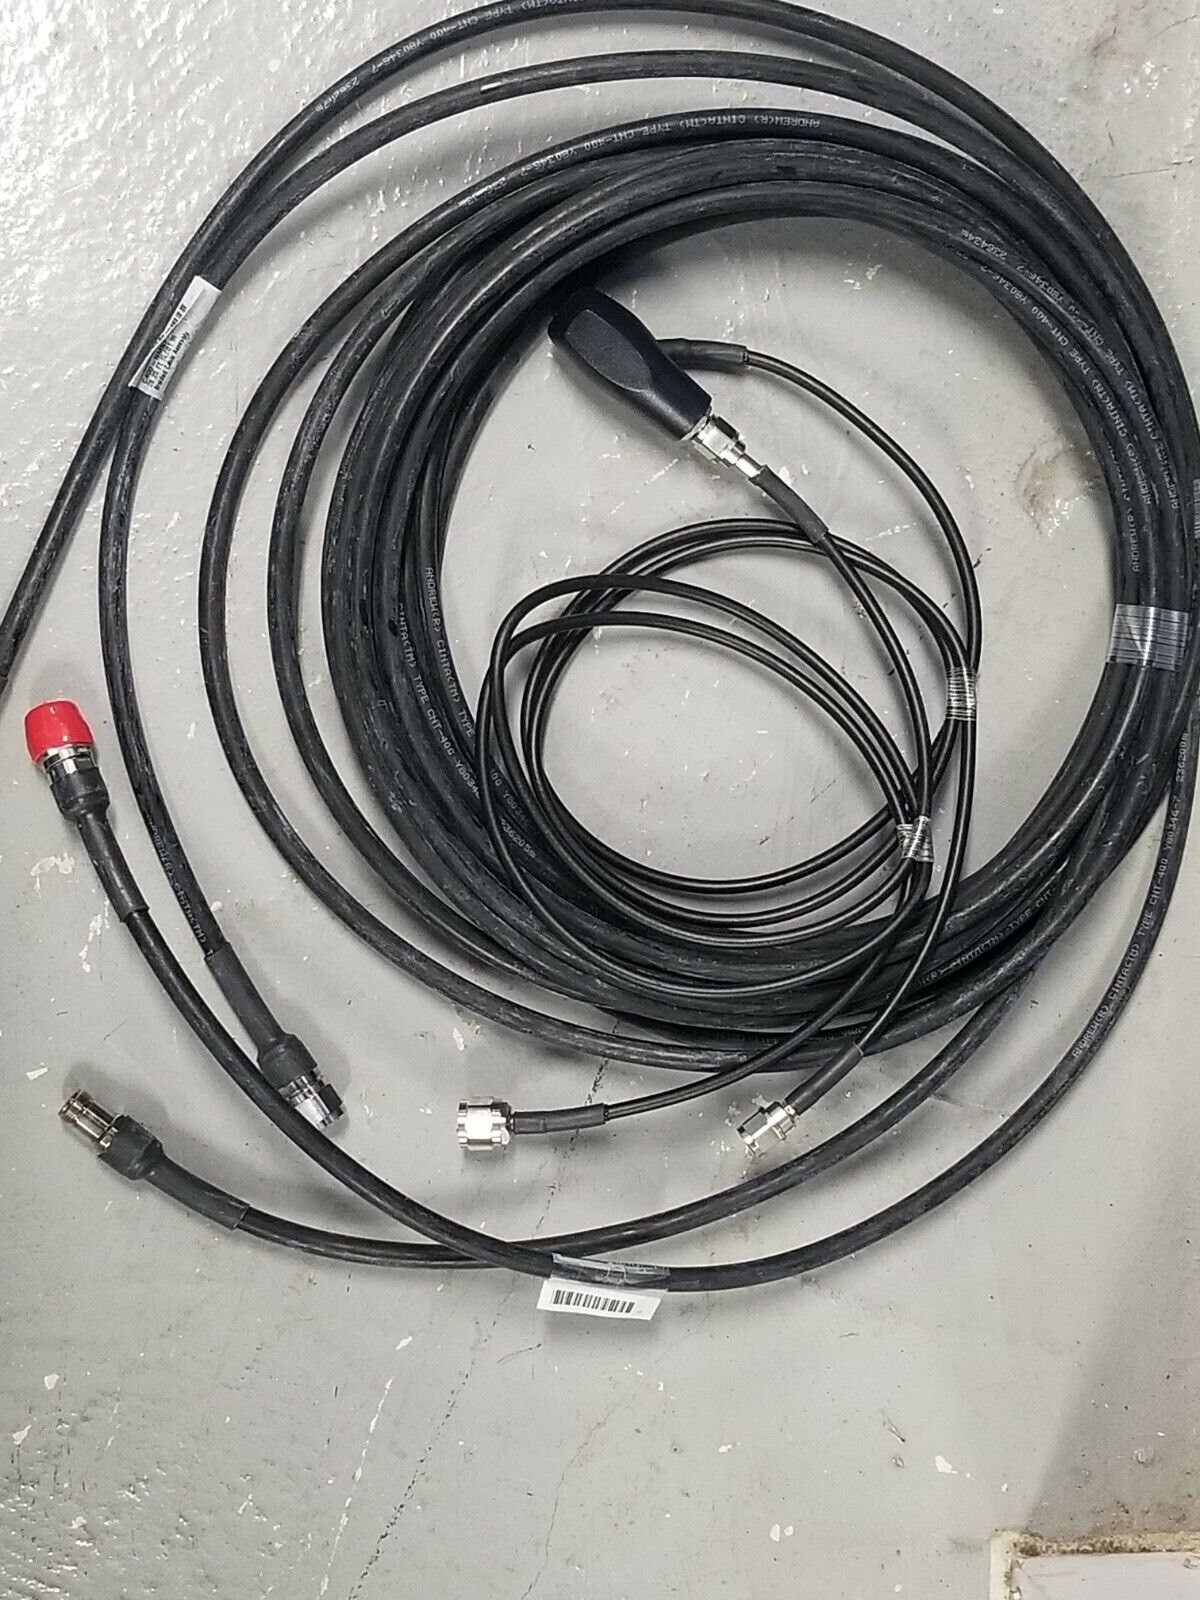 Andrew Coax 2 C400-NMNF-8M 8M & 2 cnt 240 Cables